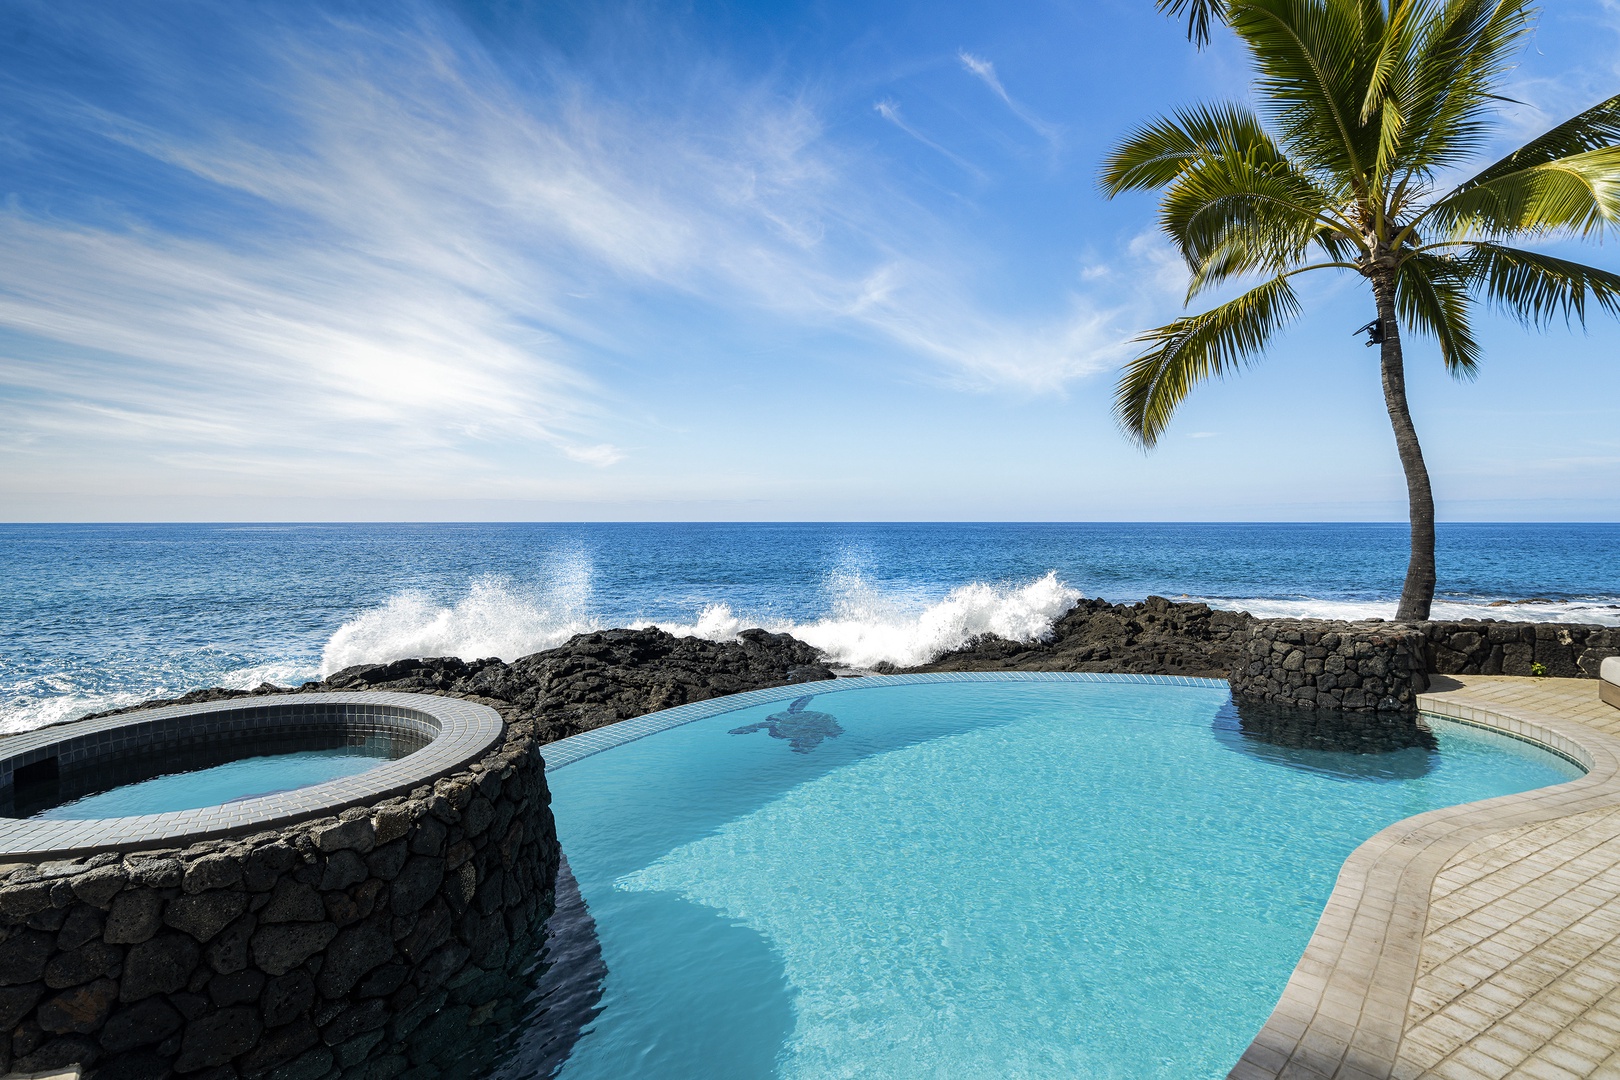 Kailua Kona Vacation Rentals, Ali'i Point #9 - Who needs TV when you have a view like this!